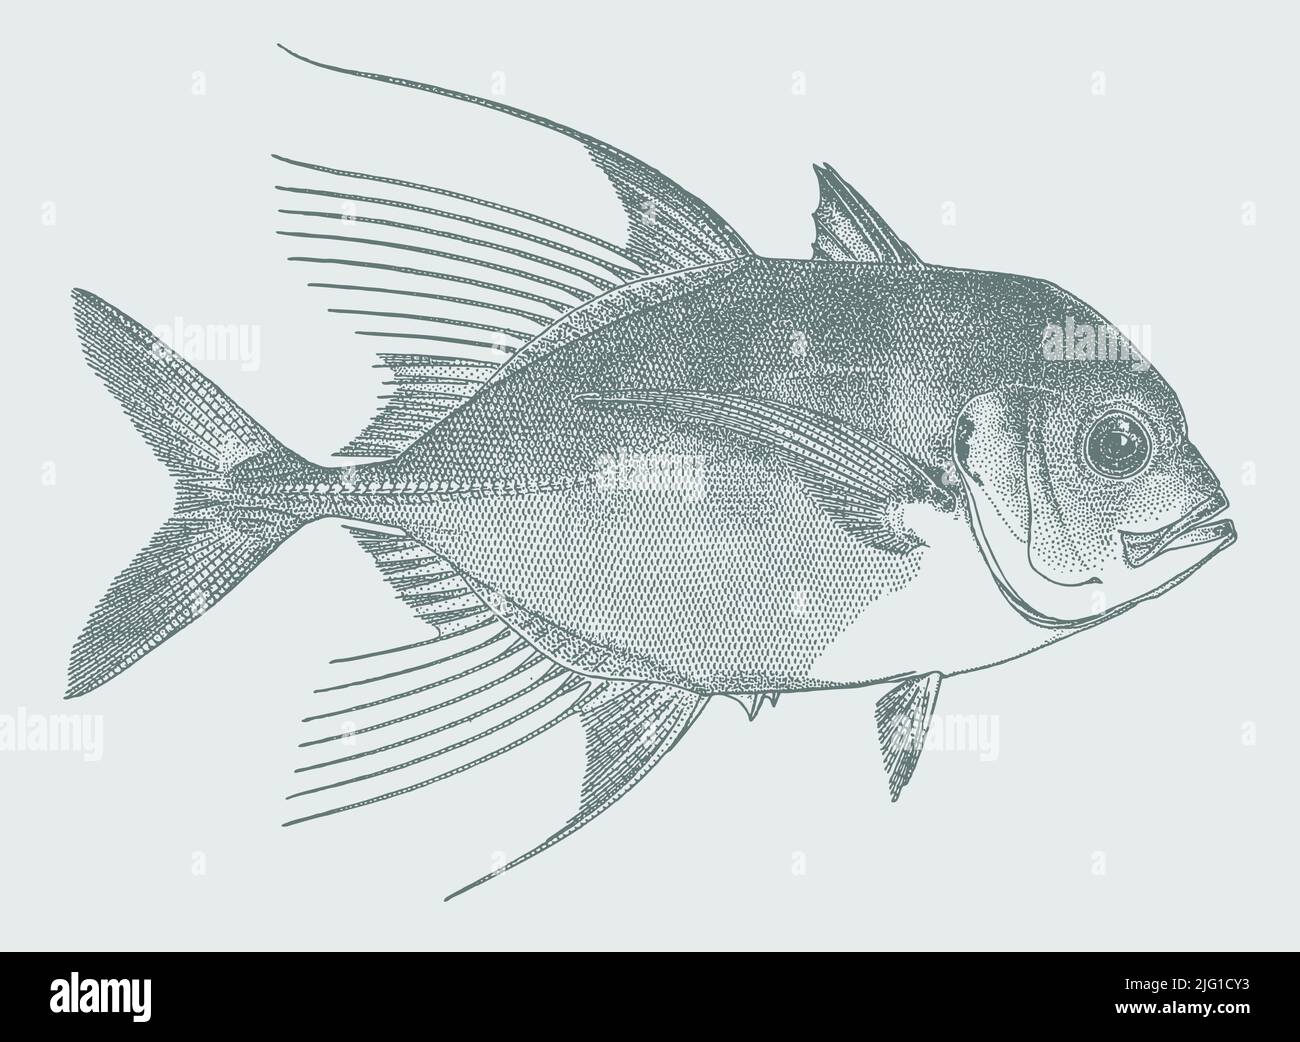 Bumpnose trevally carangoides hedlandensis, marine food fish in side view Stock Vector